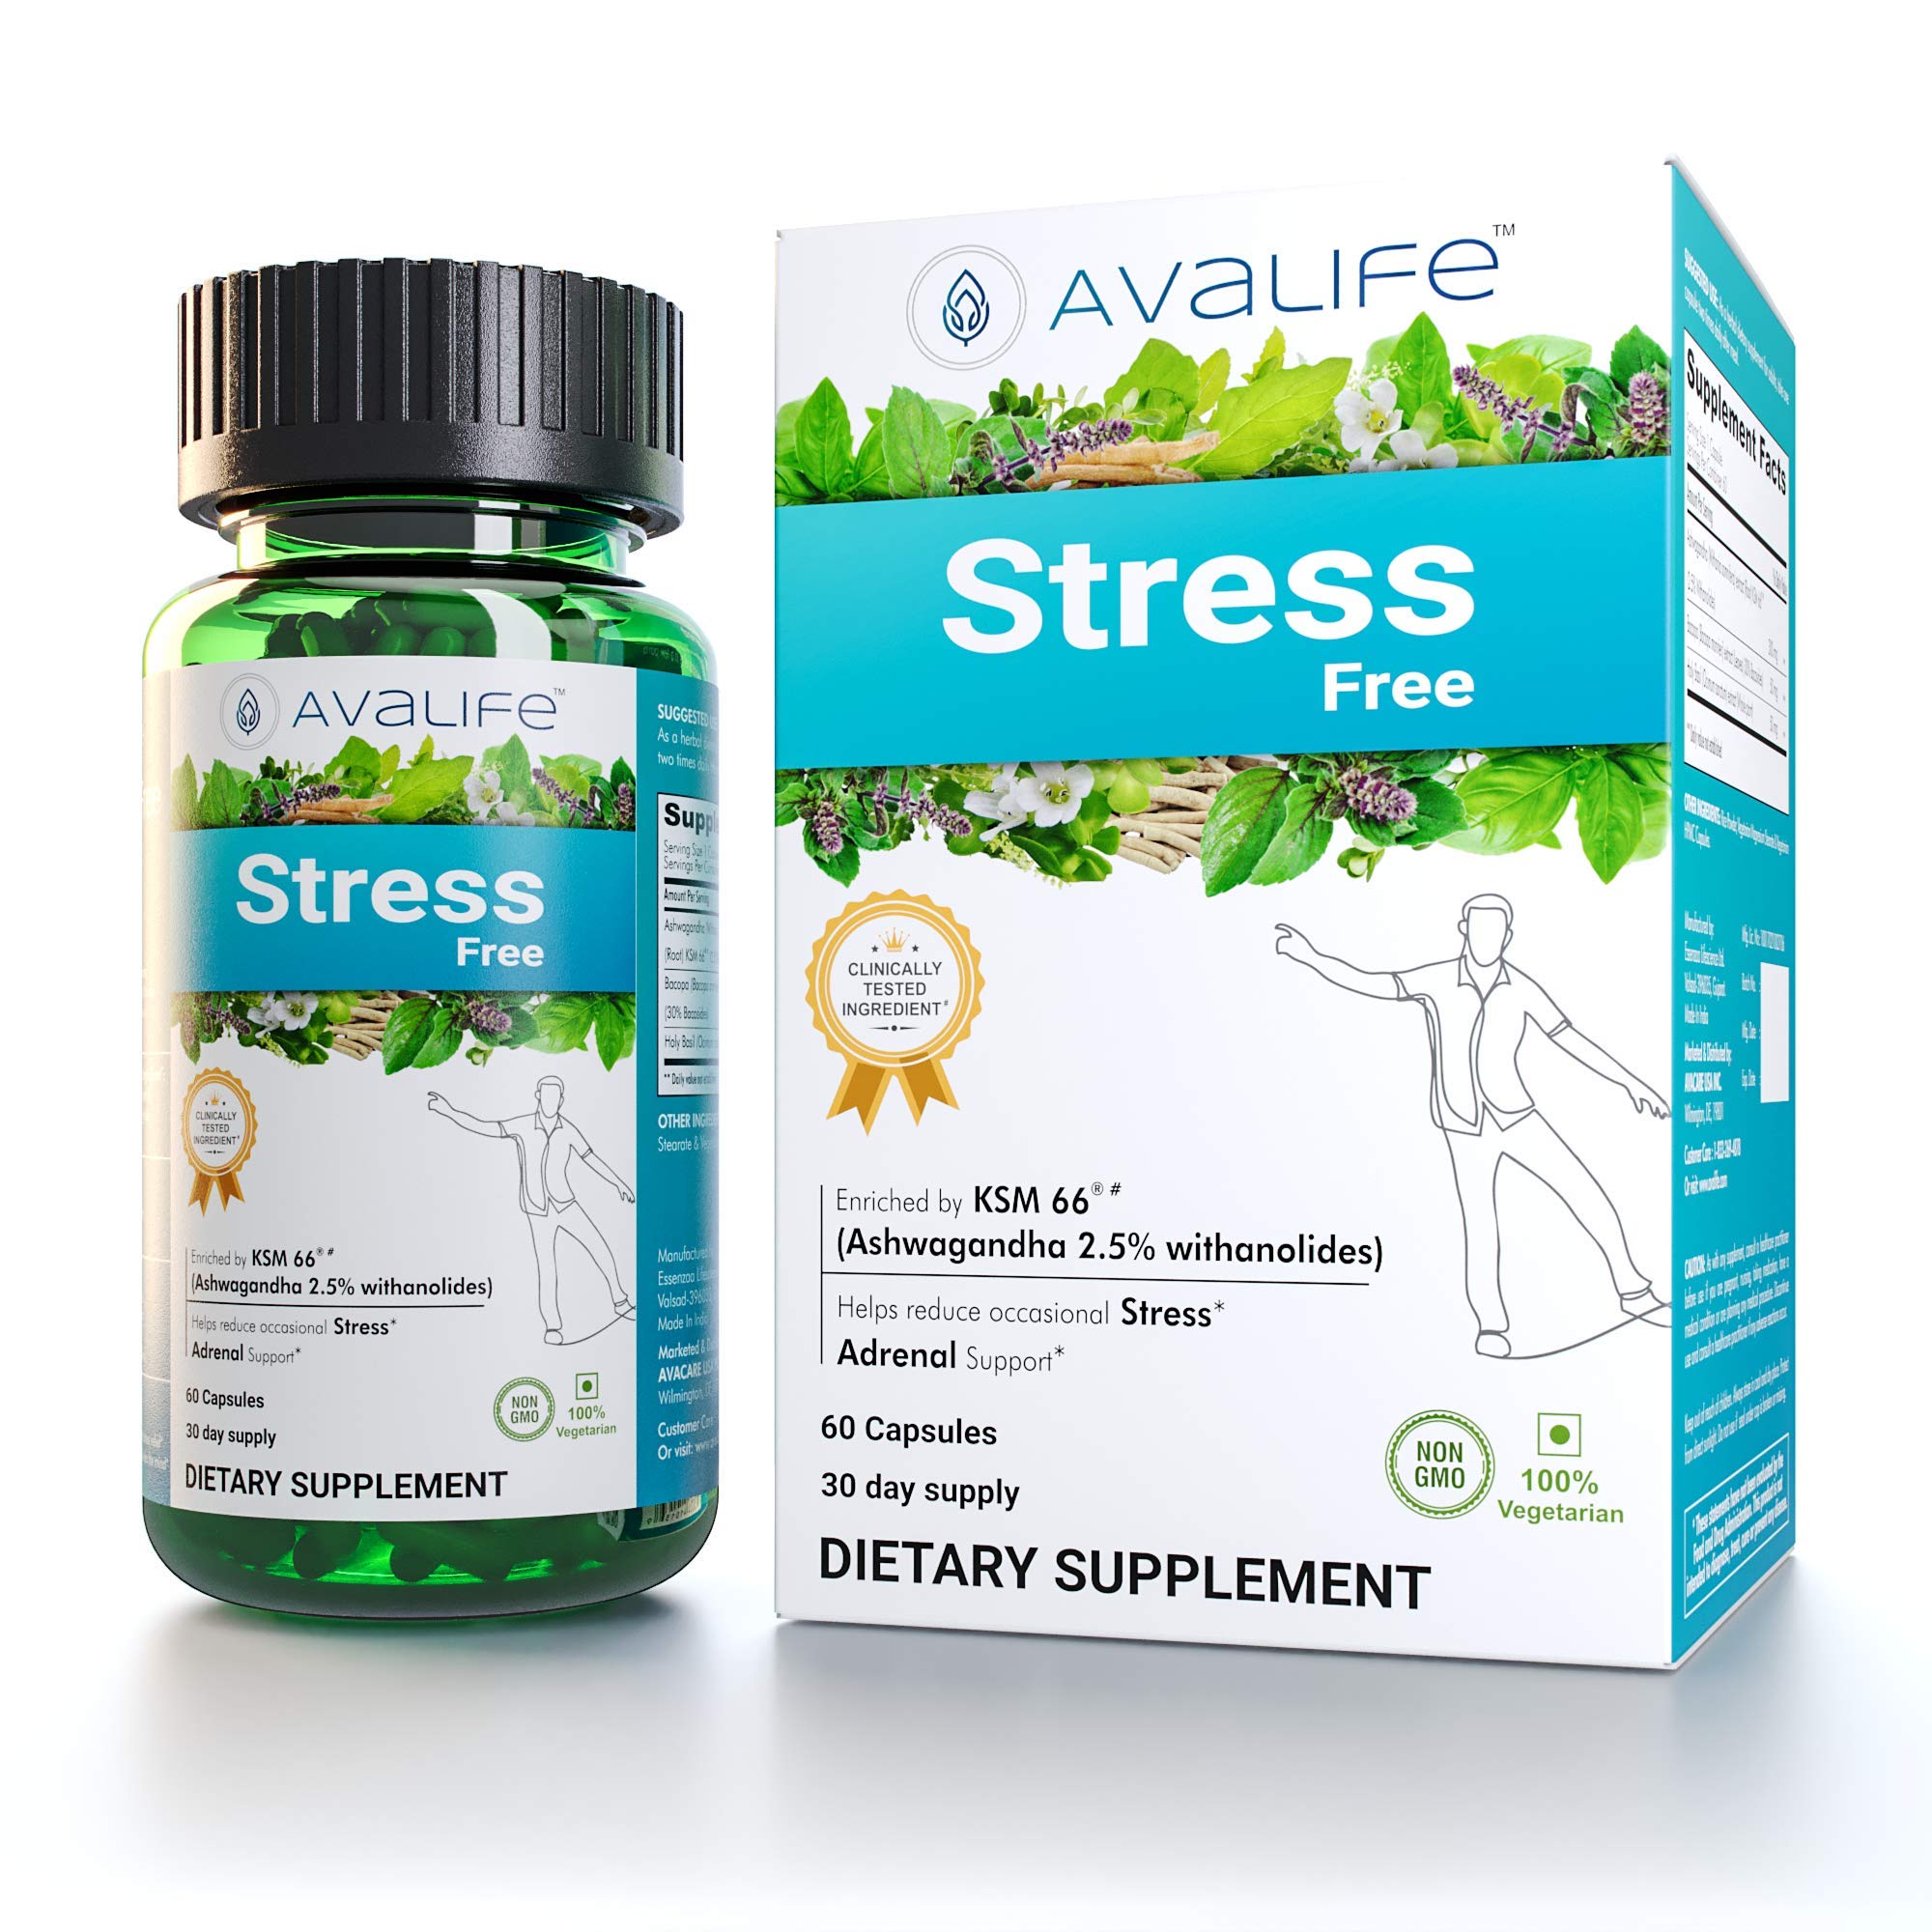 Avalife Stress Free Supplements